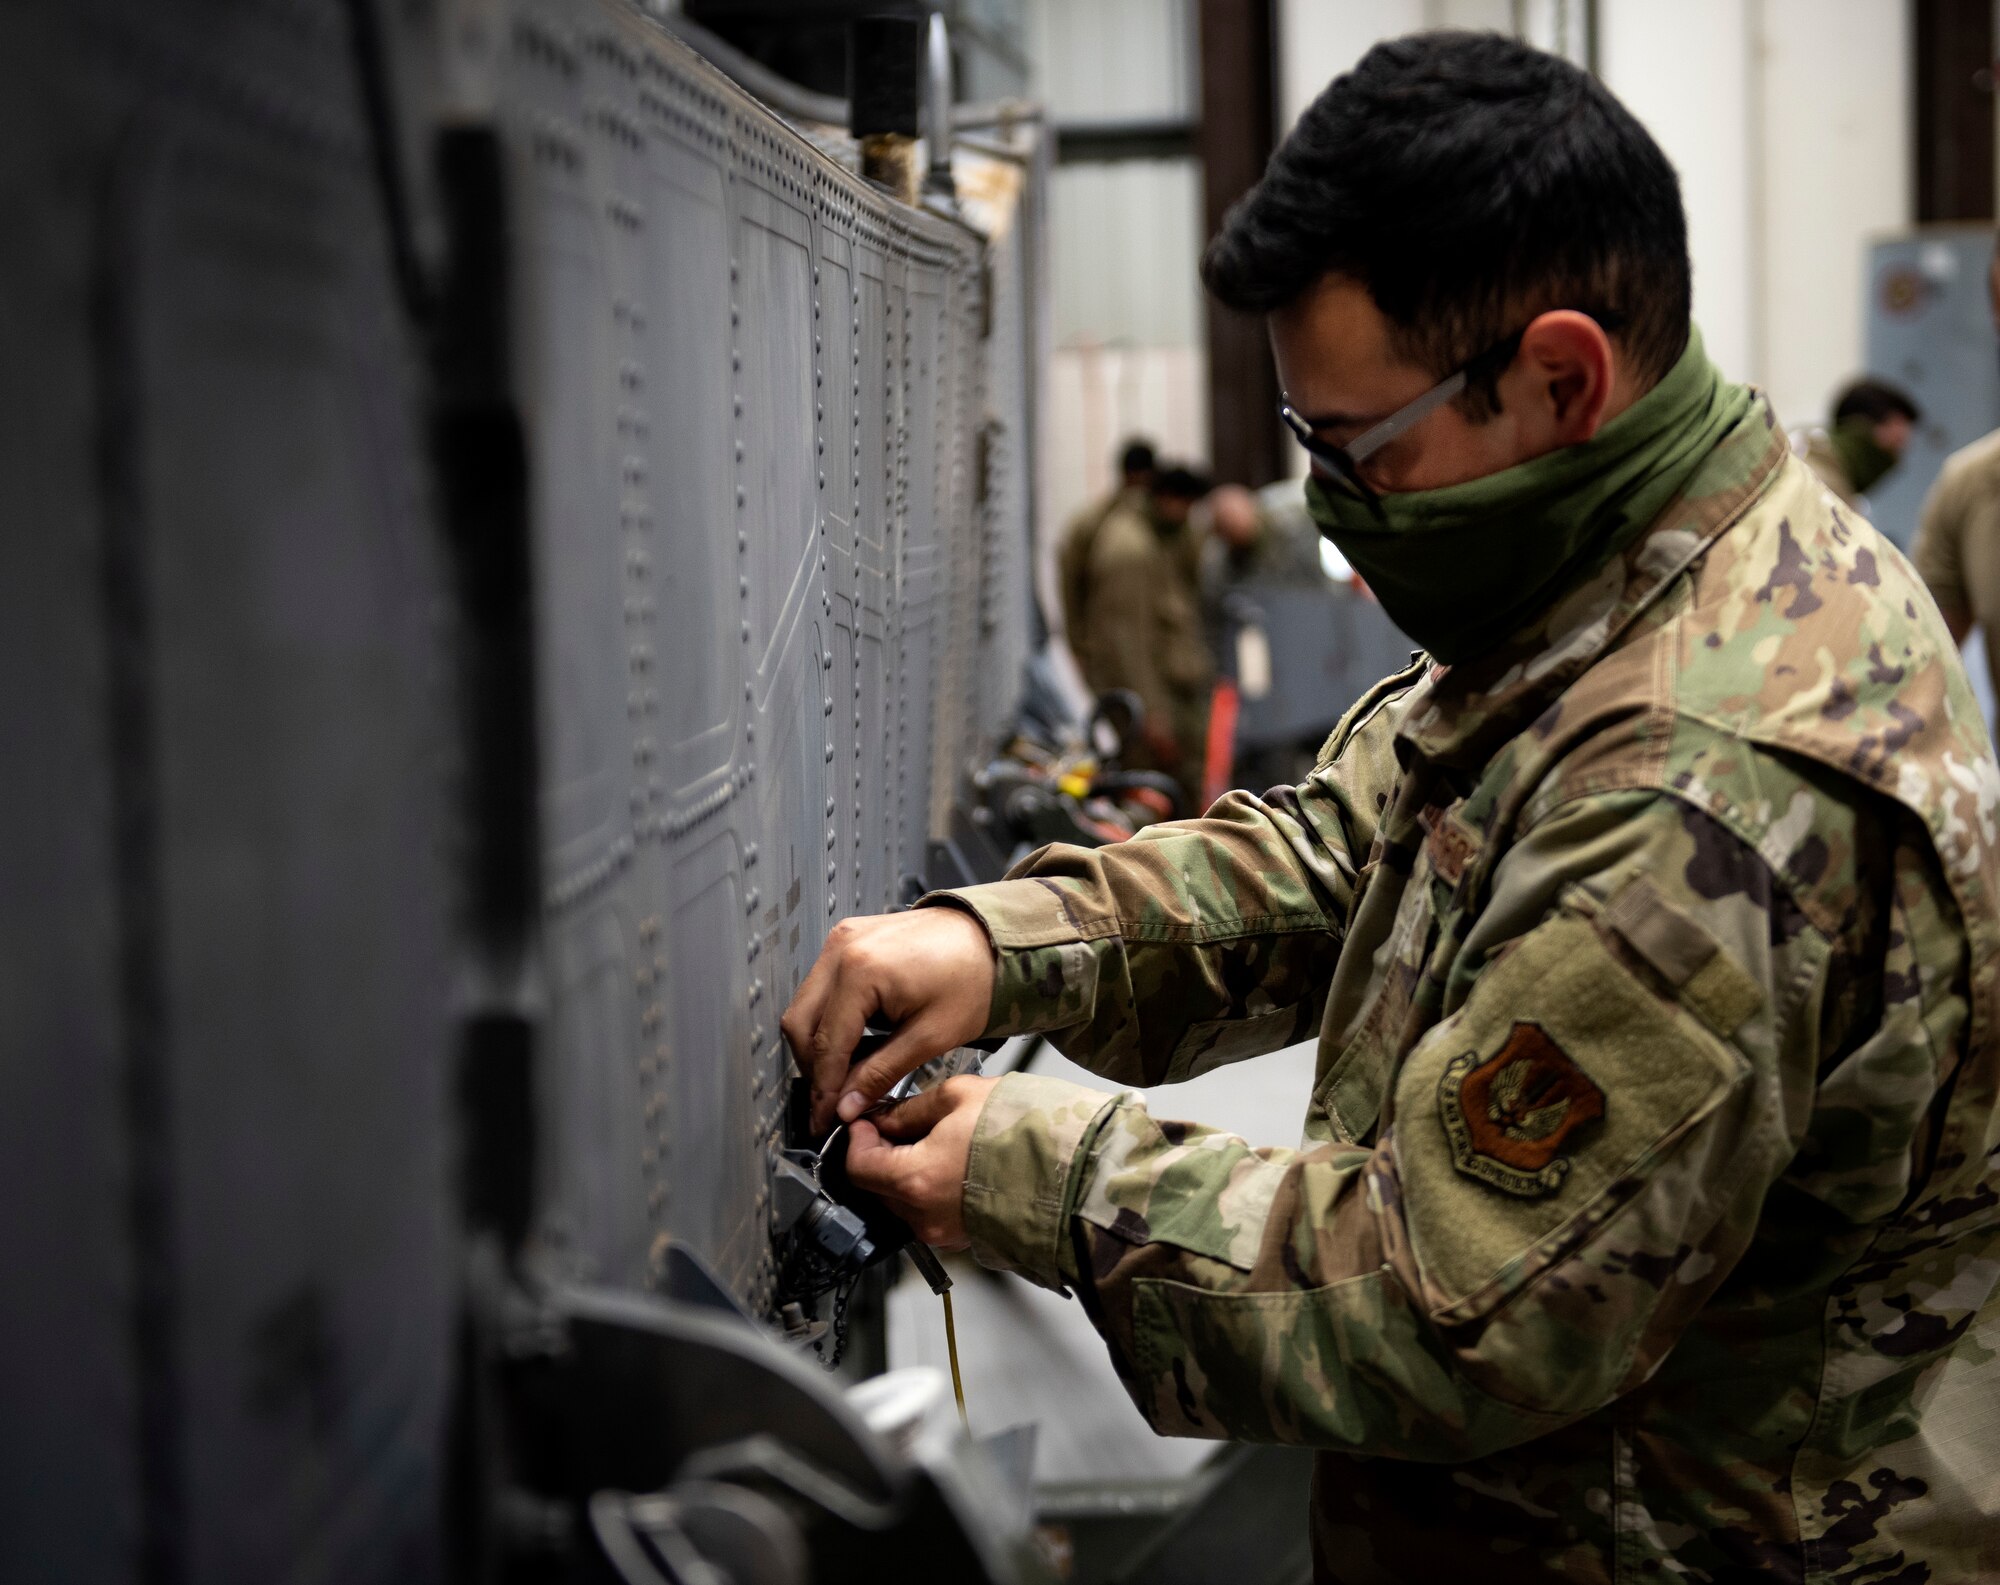 A fuel systems repair technician assigned to the 48th Maintenance Group prepares an external fuel tank for transport at Royal Air Force Lakenheath, England, April 30, 2020. The Liberty Wing’s fuel systems Airmen helped the 48th Maintenance Group earn the 2019 USAFE-AFAFRICA Clements McMullen Memorial Daedalian Weapon System Maintenance Trophy. (U.S. Air Force photo by Airman 1st Class Madeline Herzog)